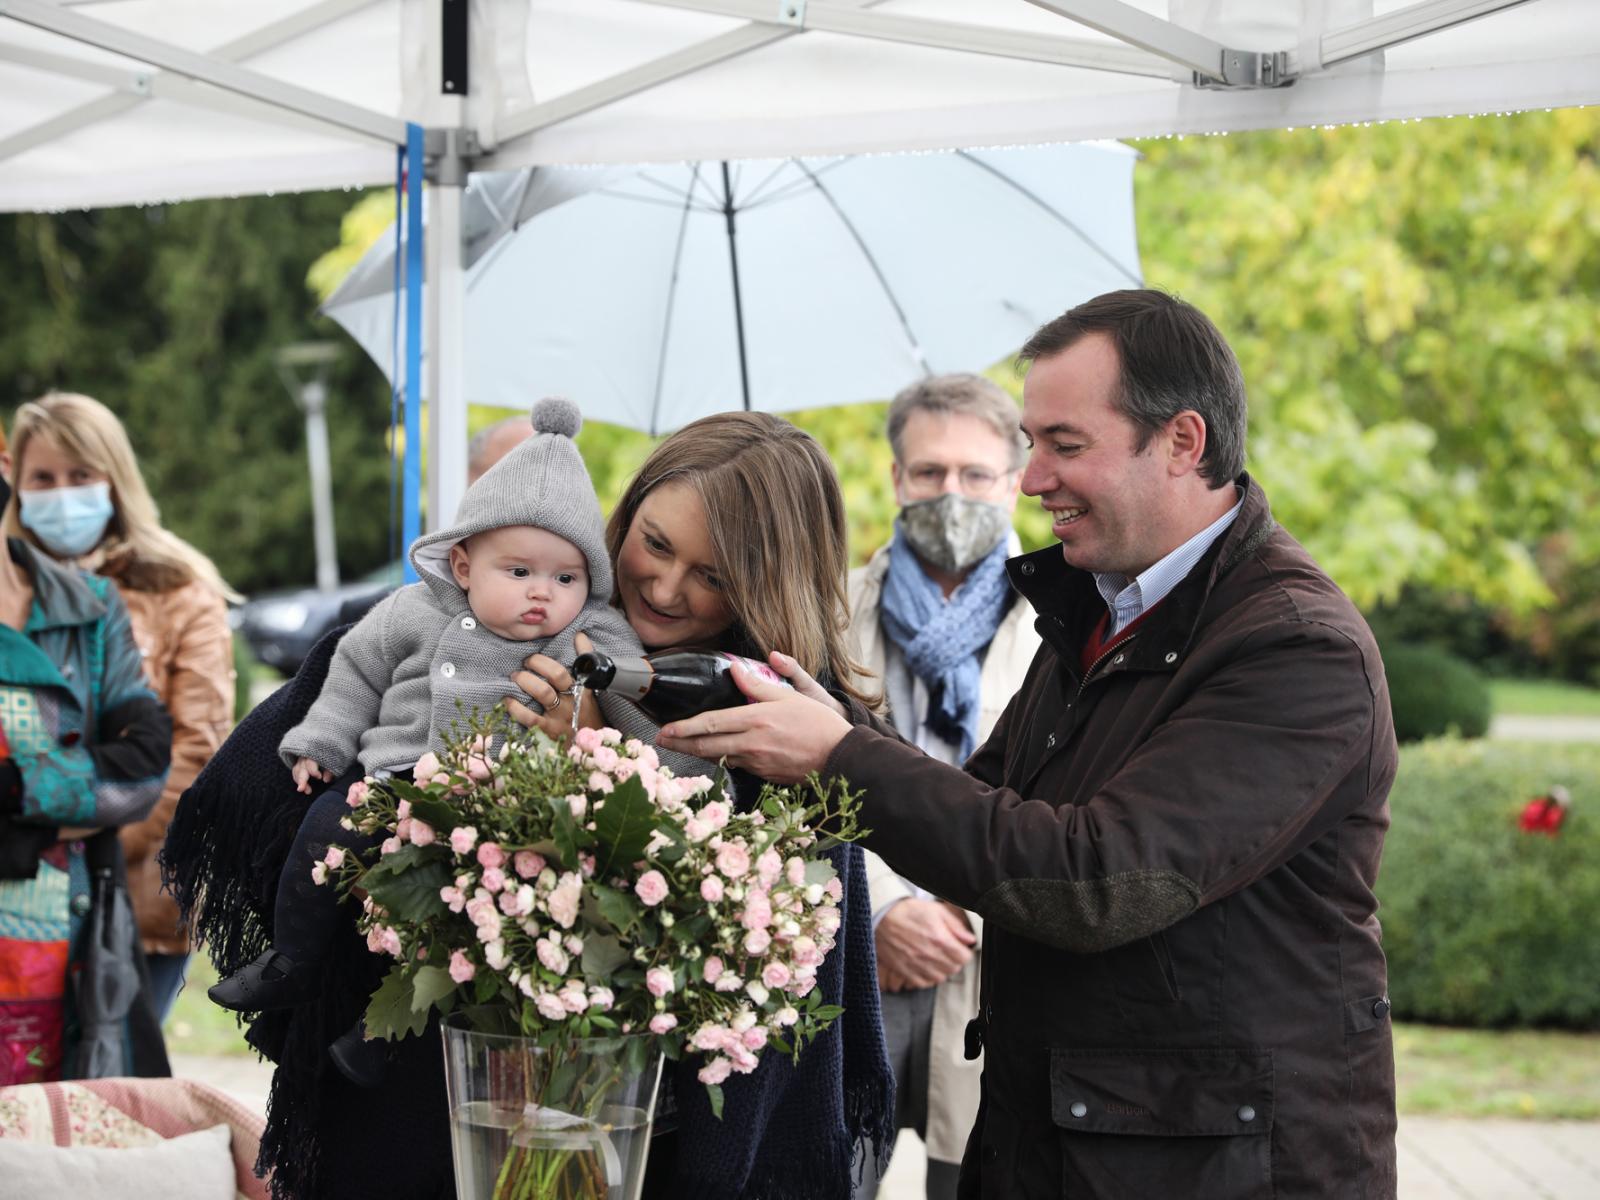 The Hereditary Couple and Prince Charles discovering the roses